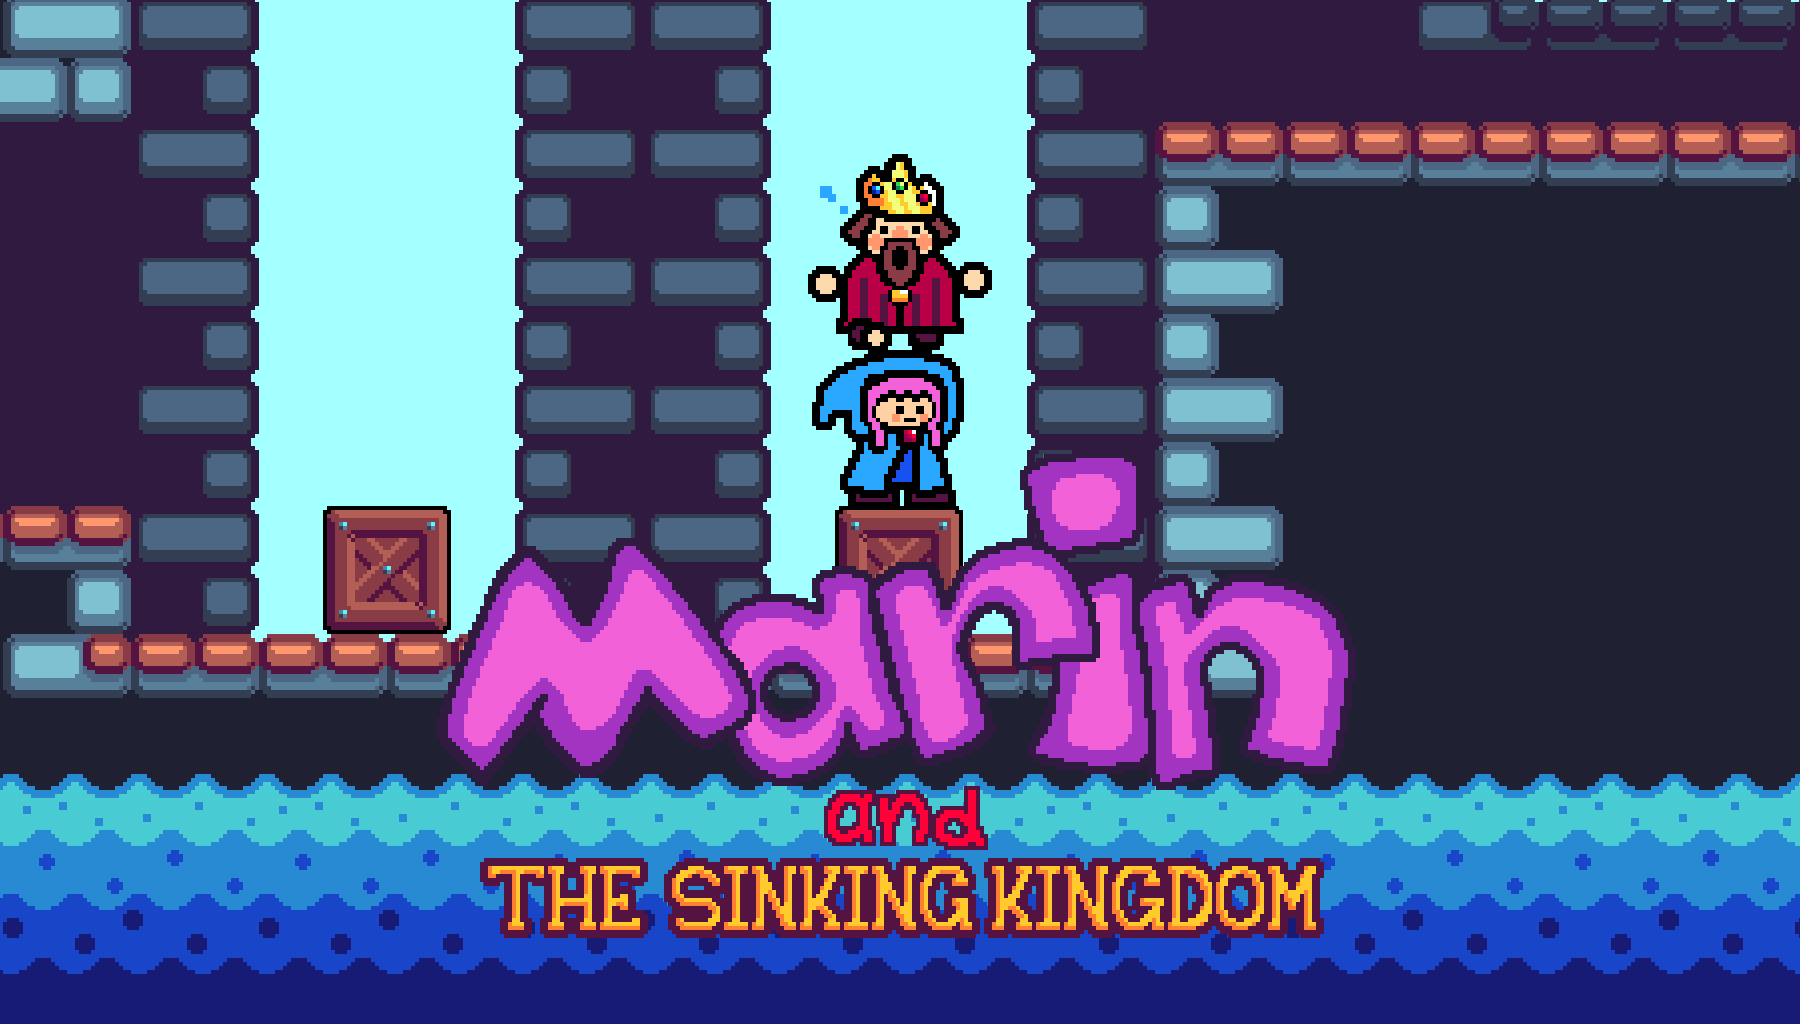 Marin and The Sinking Kingdom